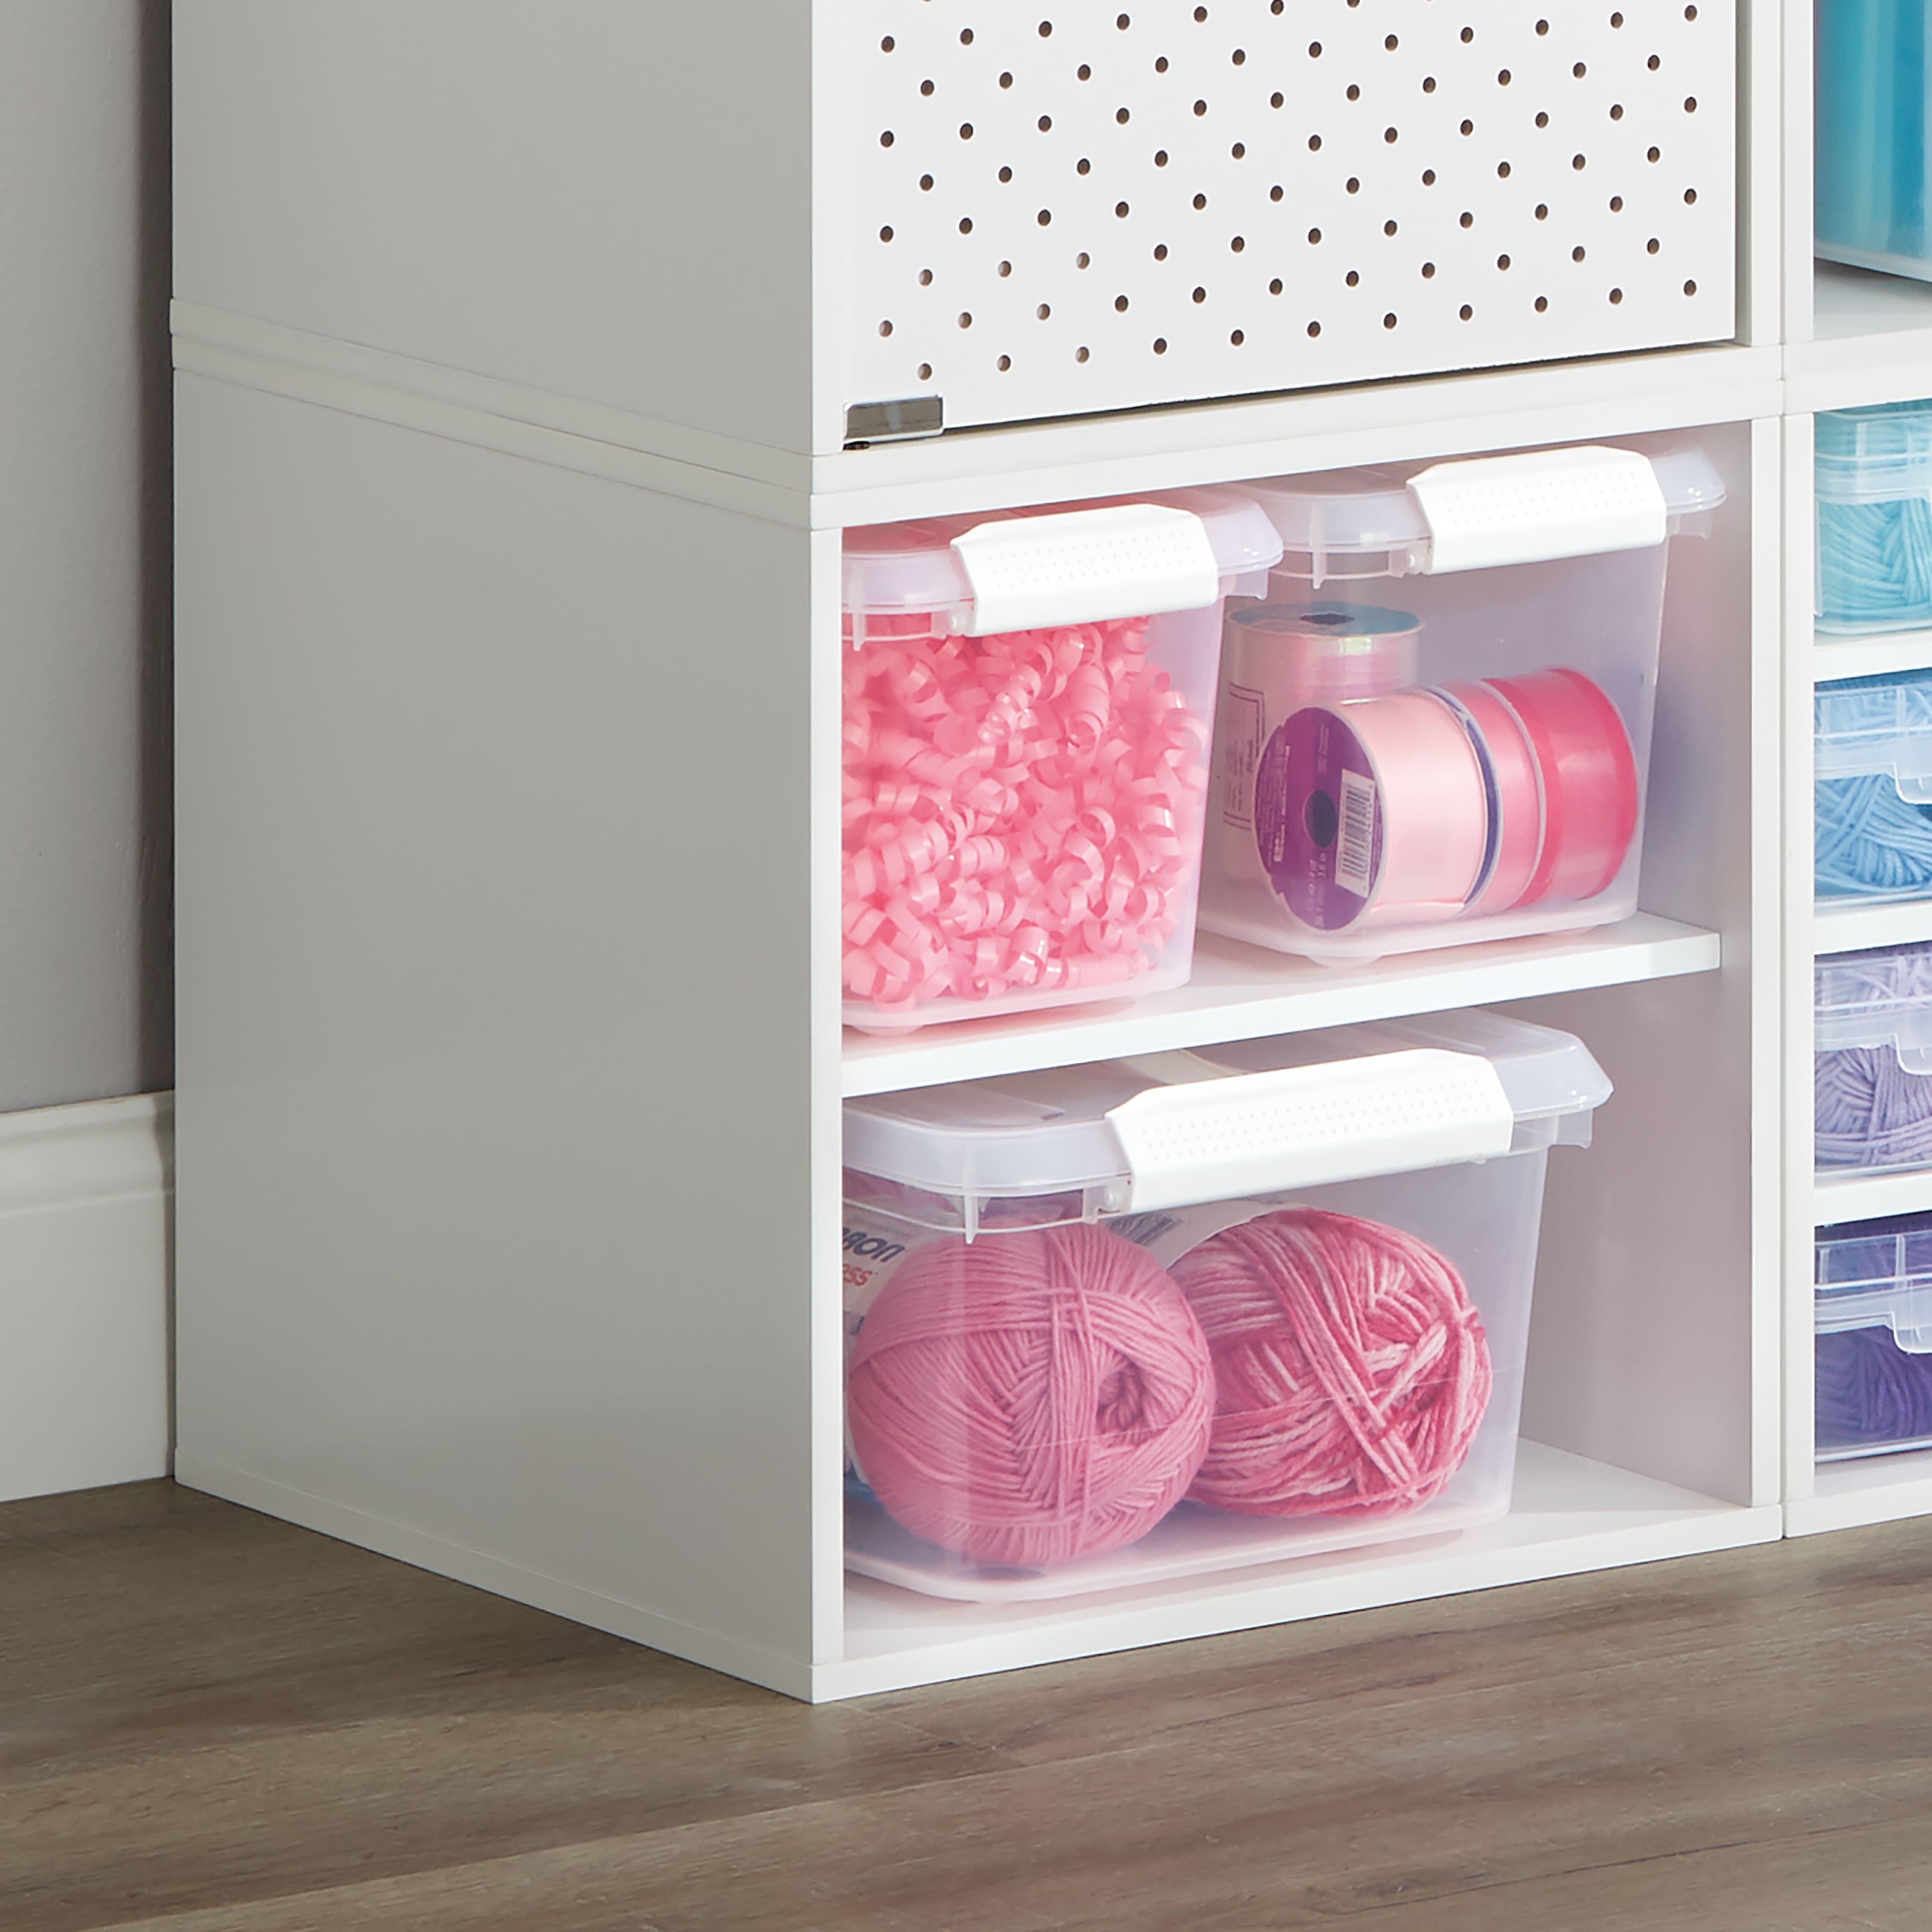 Small Space Organization  The Ultimate Craft Room w: Michaels Stores  Featuring Simply Tidy 